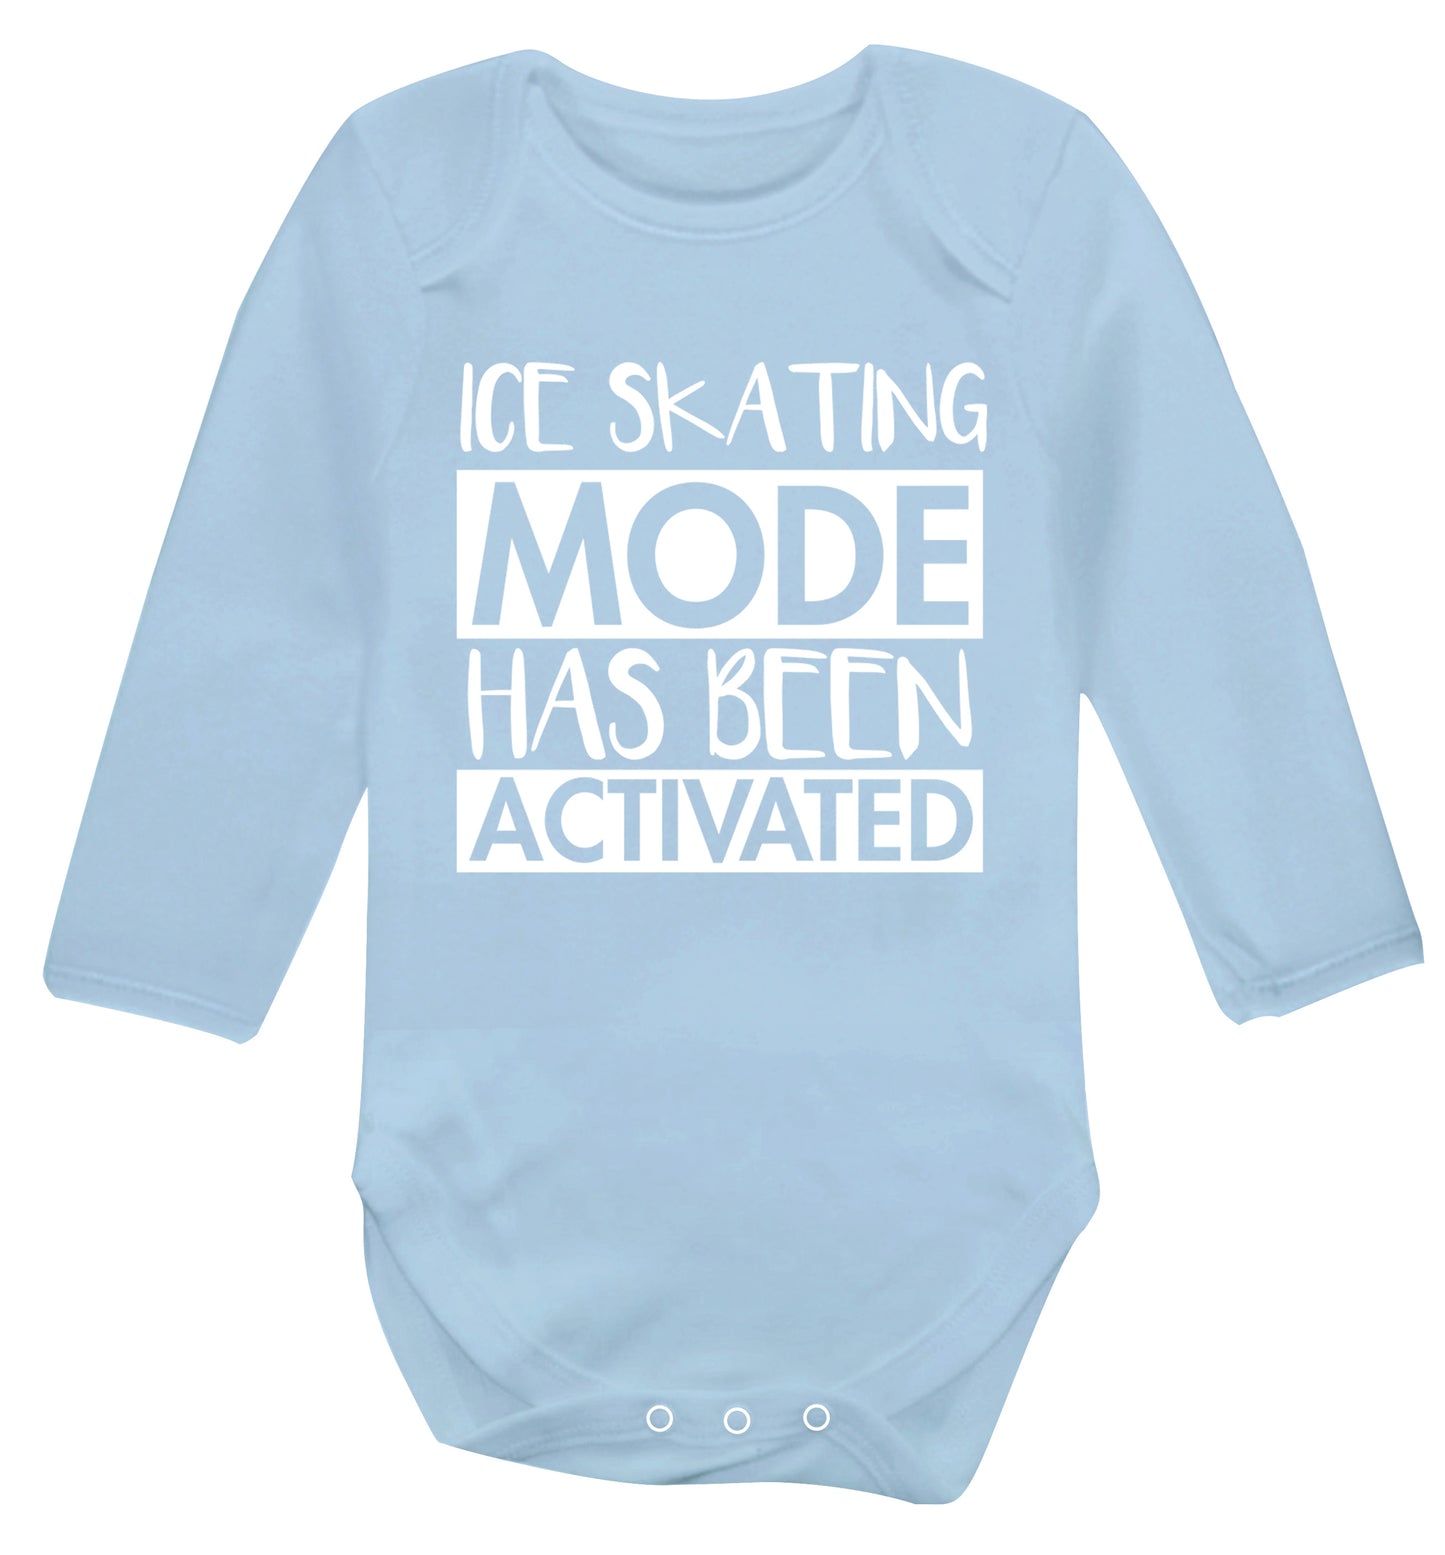 Ice skating mode activated Baby Vest long sleeved pale blue 6-12 months